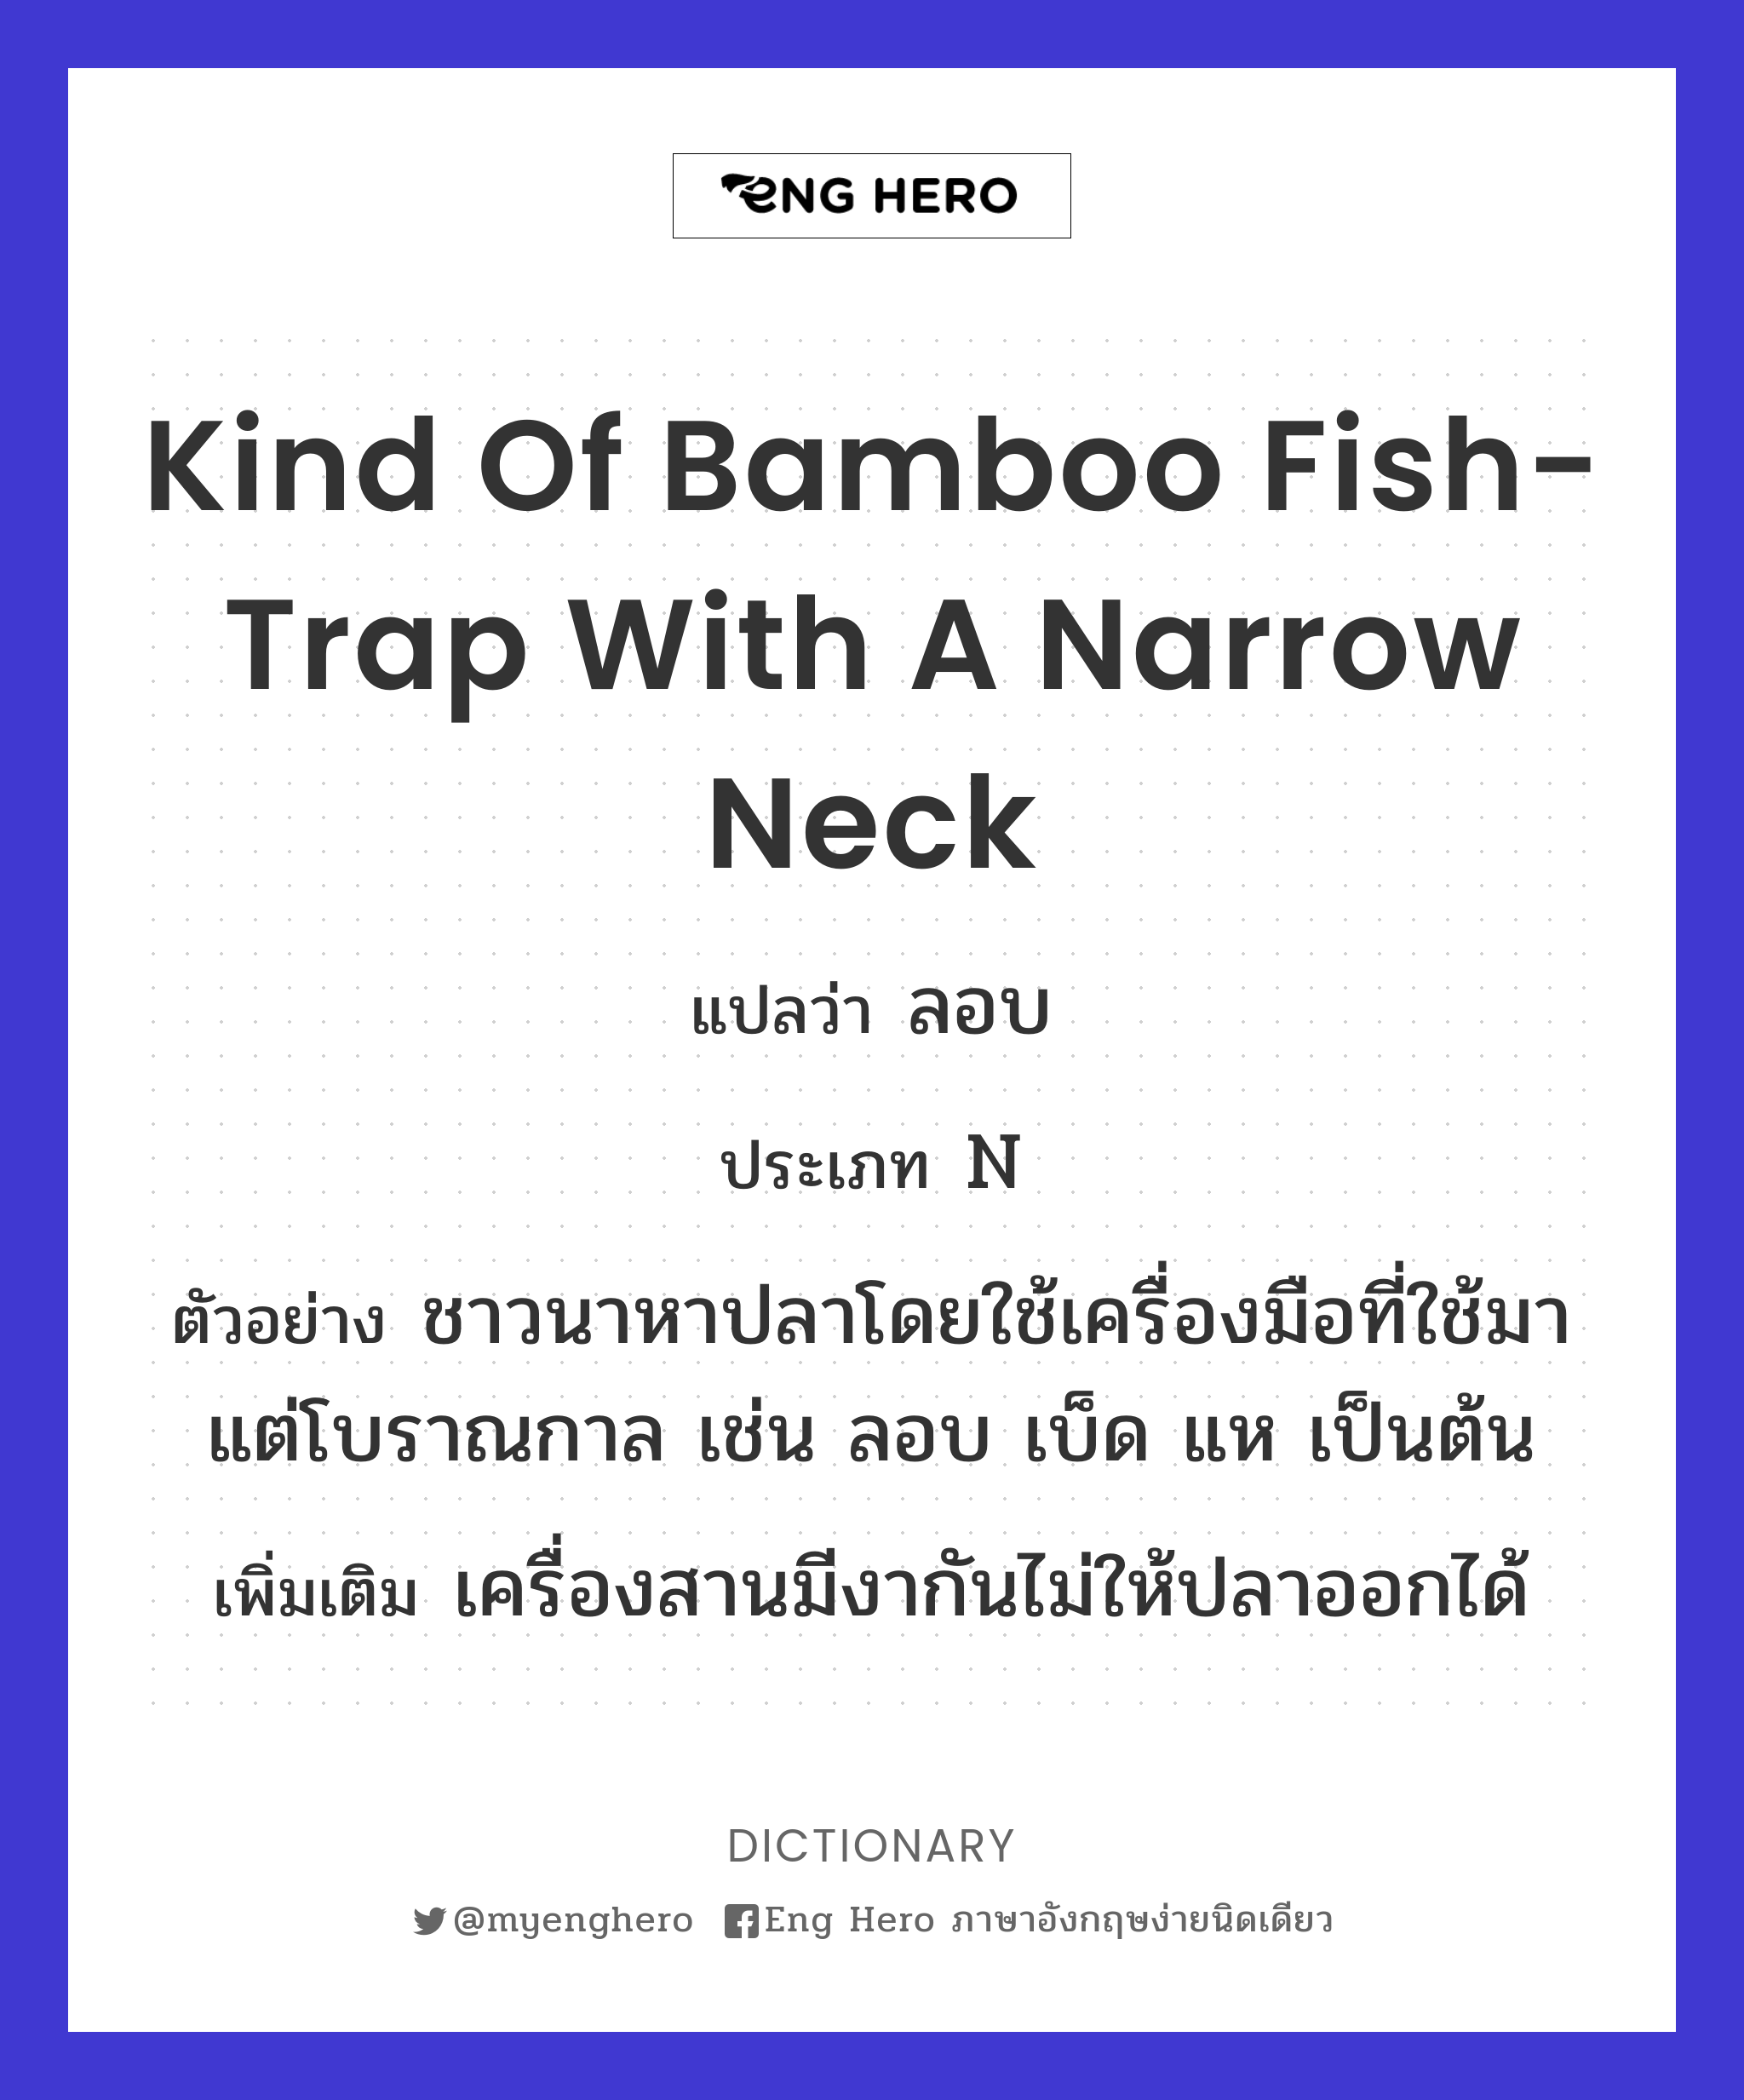 kind of bamboo fish-trap with a narrow neck